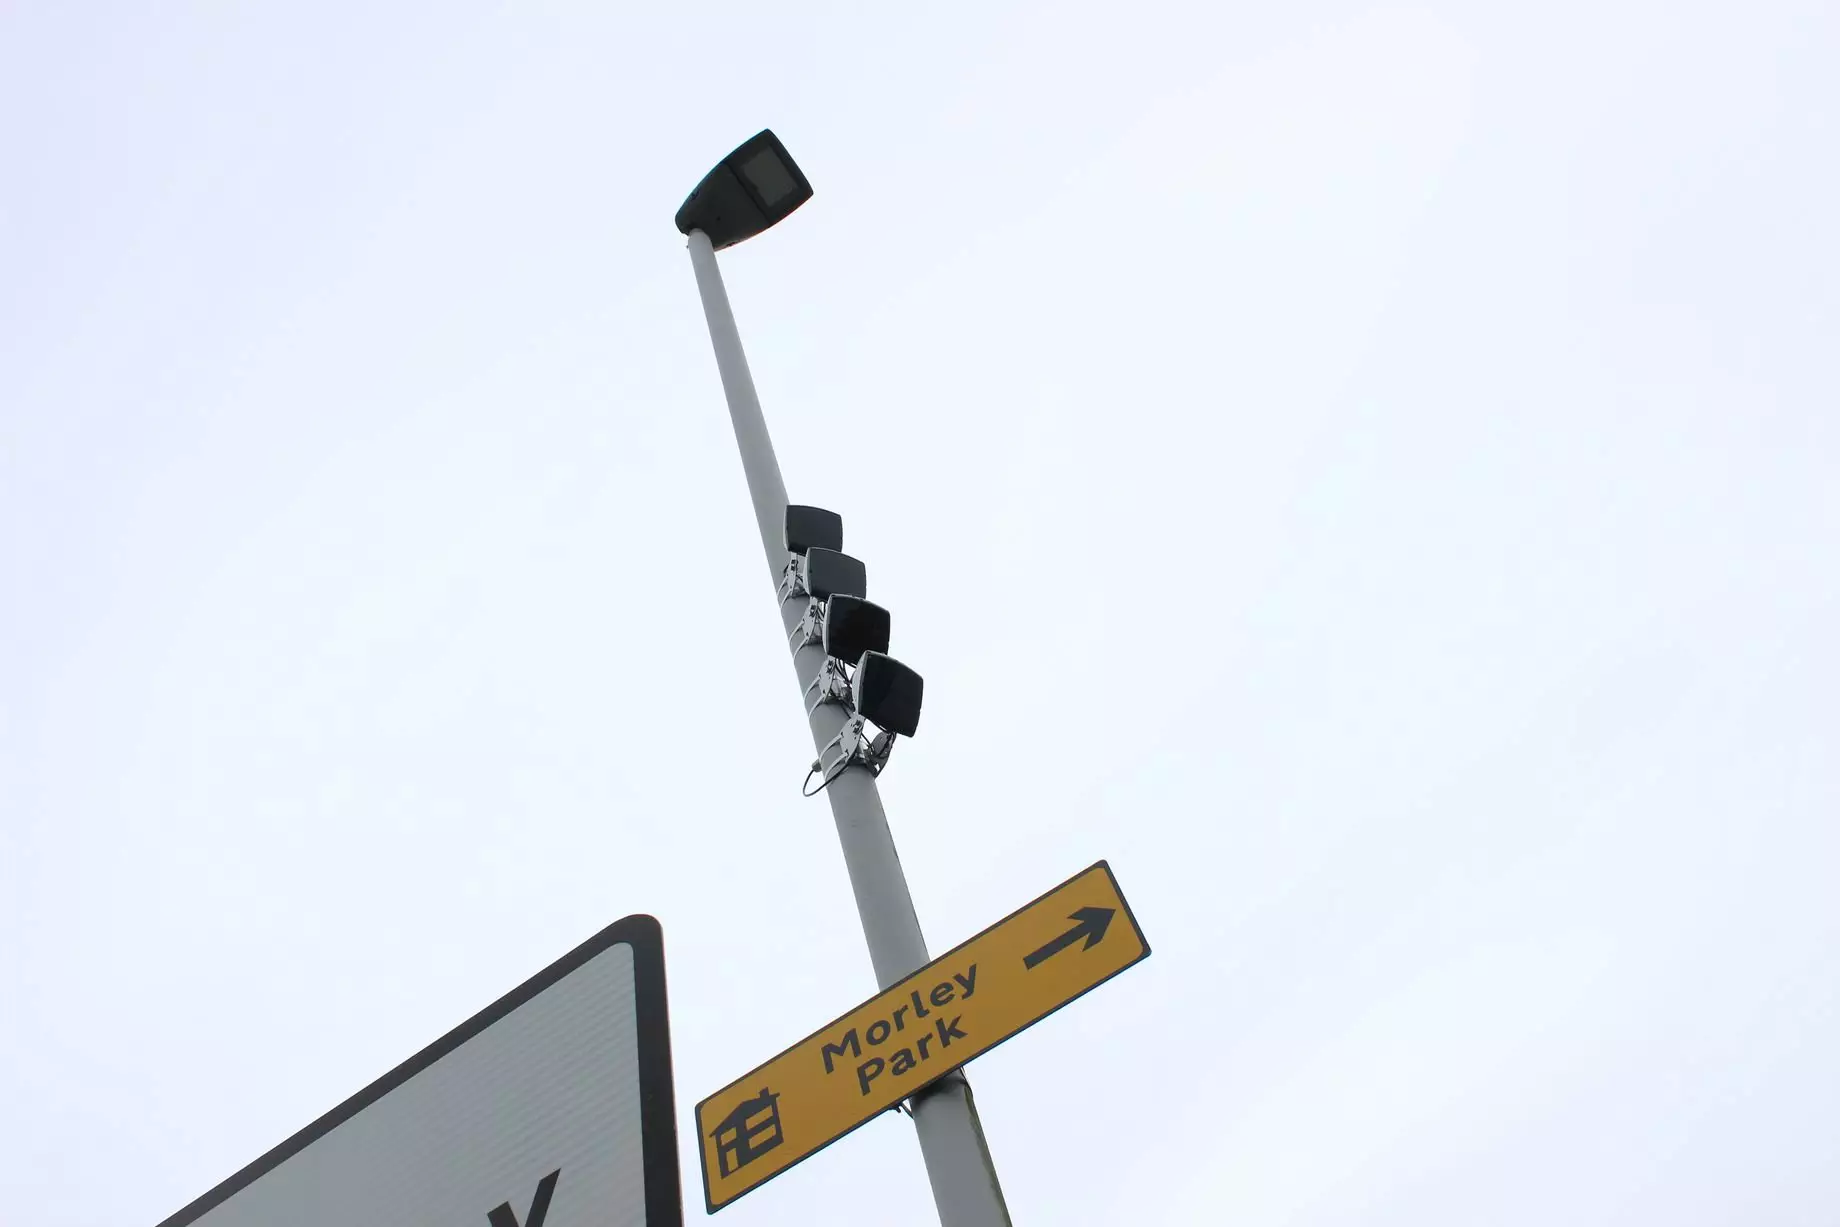 The new speed cameras capture much more than just your speed.